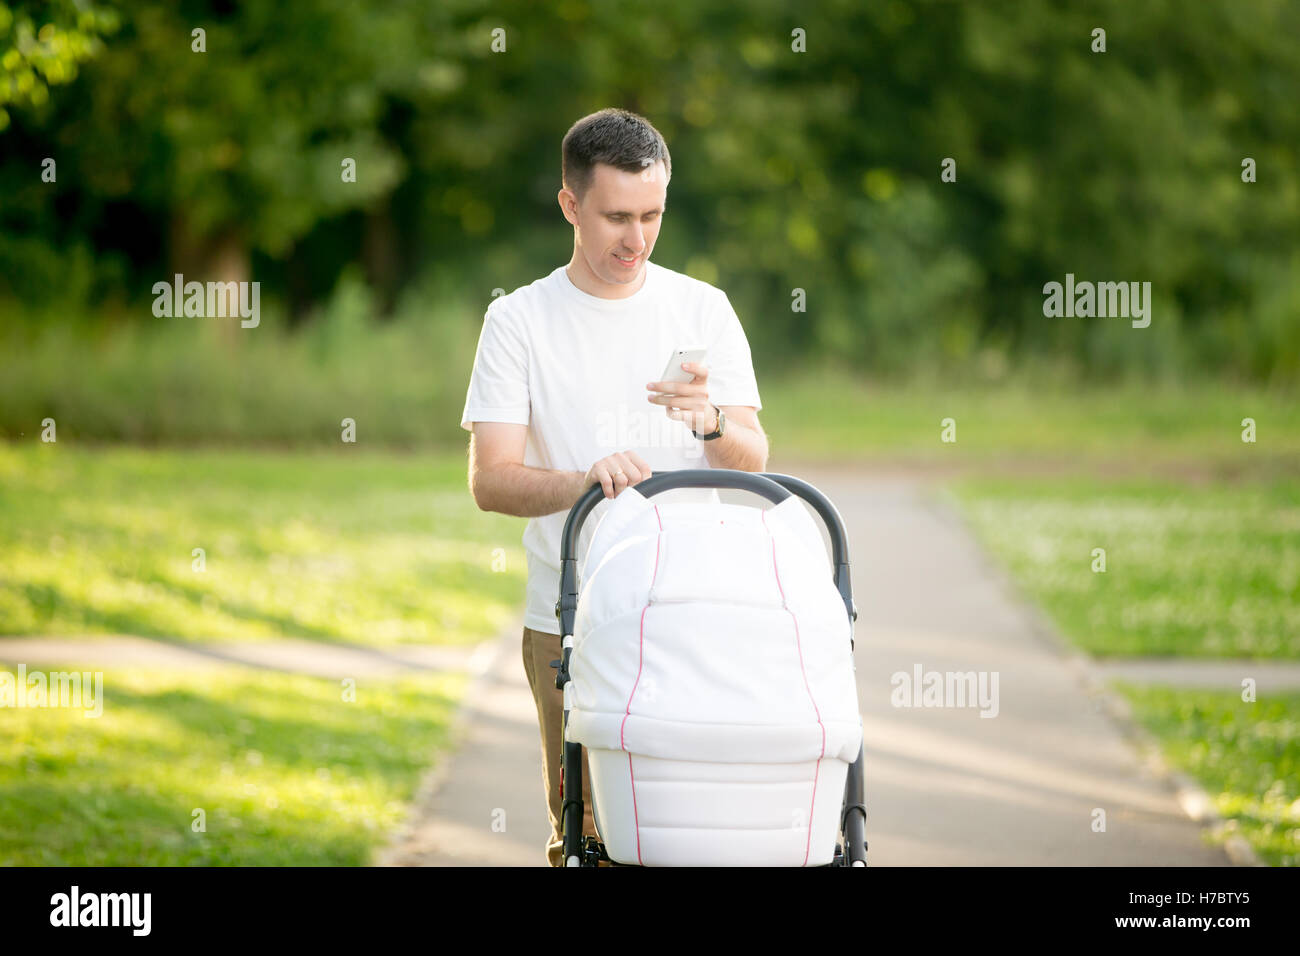 Man with baby carriage in park looking at phone screen Stock Photo